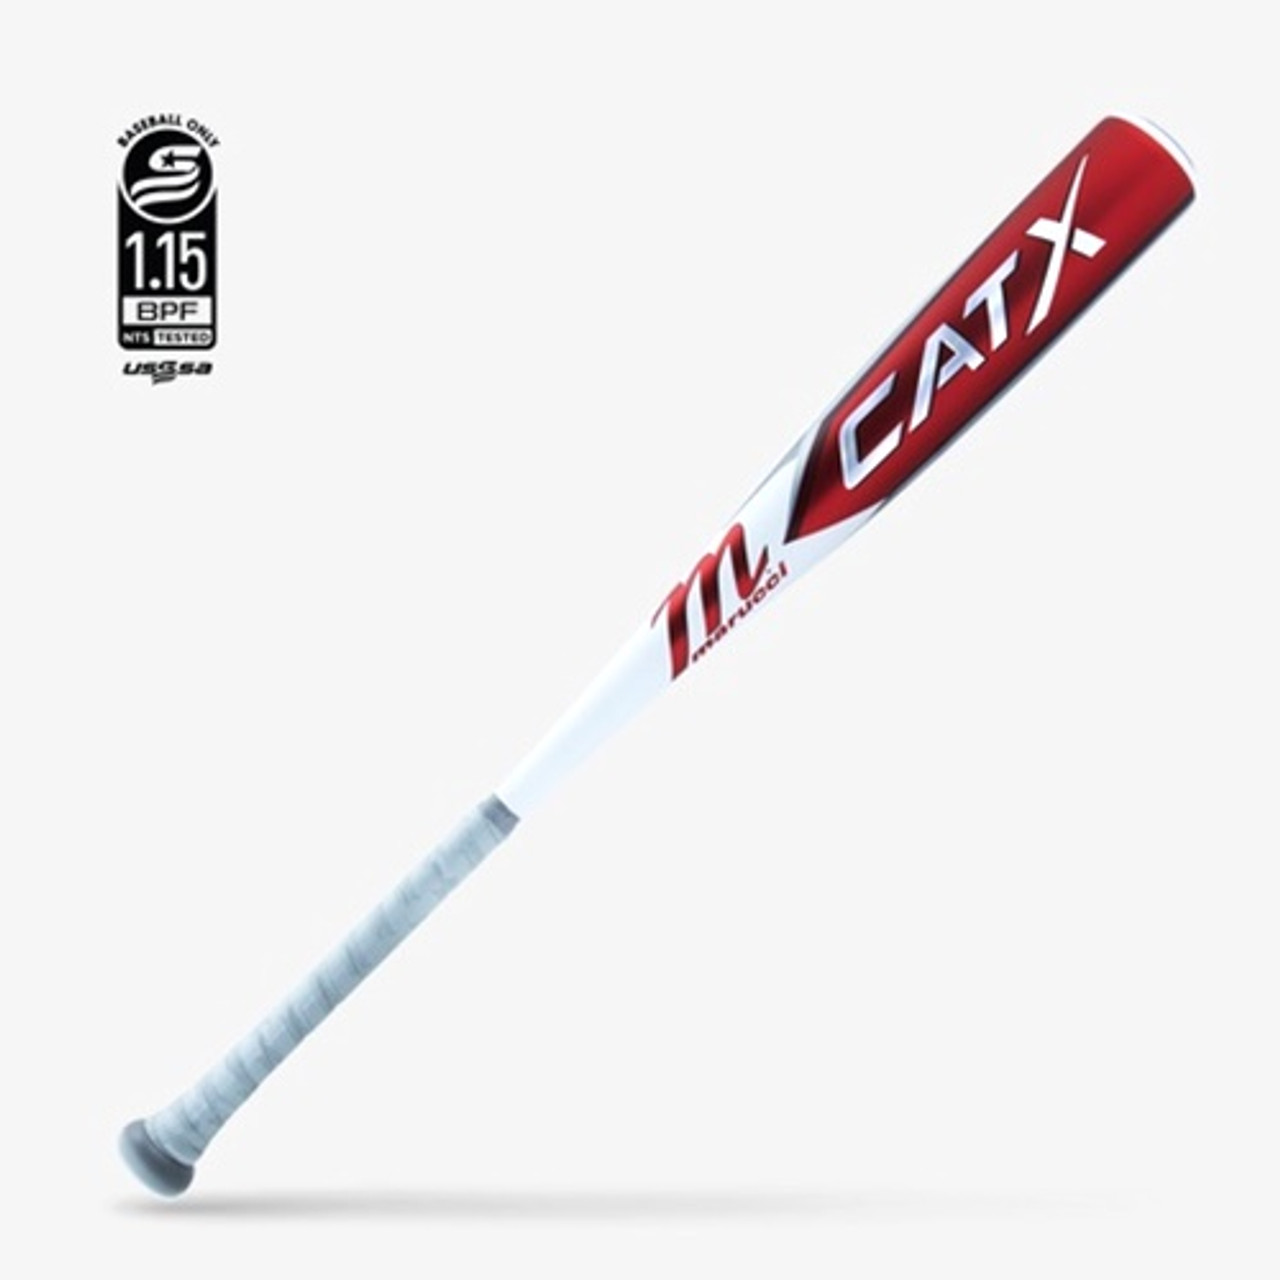 The CATX baseball bat boasts a number of advanced features for improved performance and feel. Its finely tuned barrel profile increases surface area for better power and swing speed, while a balanced design allows for faster swings. The bat also features a patent pending liquid-gel dampening knob, which absorbs vibrations for a smooth and solid contact. One-piece alloy construction provides a traditional swing feel, while precision balanced barrel and multi-variable wall design expands the sweet spot. The ring-free barrel construction allows for more flex and better performance. The custom-molded handle taper is ergonomically designed for a better fit and control. The micro-perforated soft-touch grip offers a soft and tacky feel for improved control. The CATX comes with a gray 1.75mm grip and a one-year warranty. It is certified by USSSA with a 1.15 BPF and has a 2 3/4 inches barrel diameter.